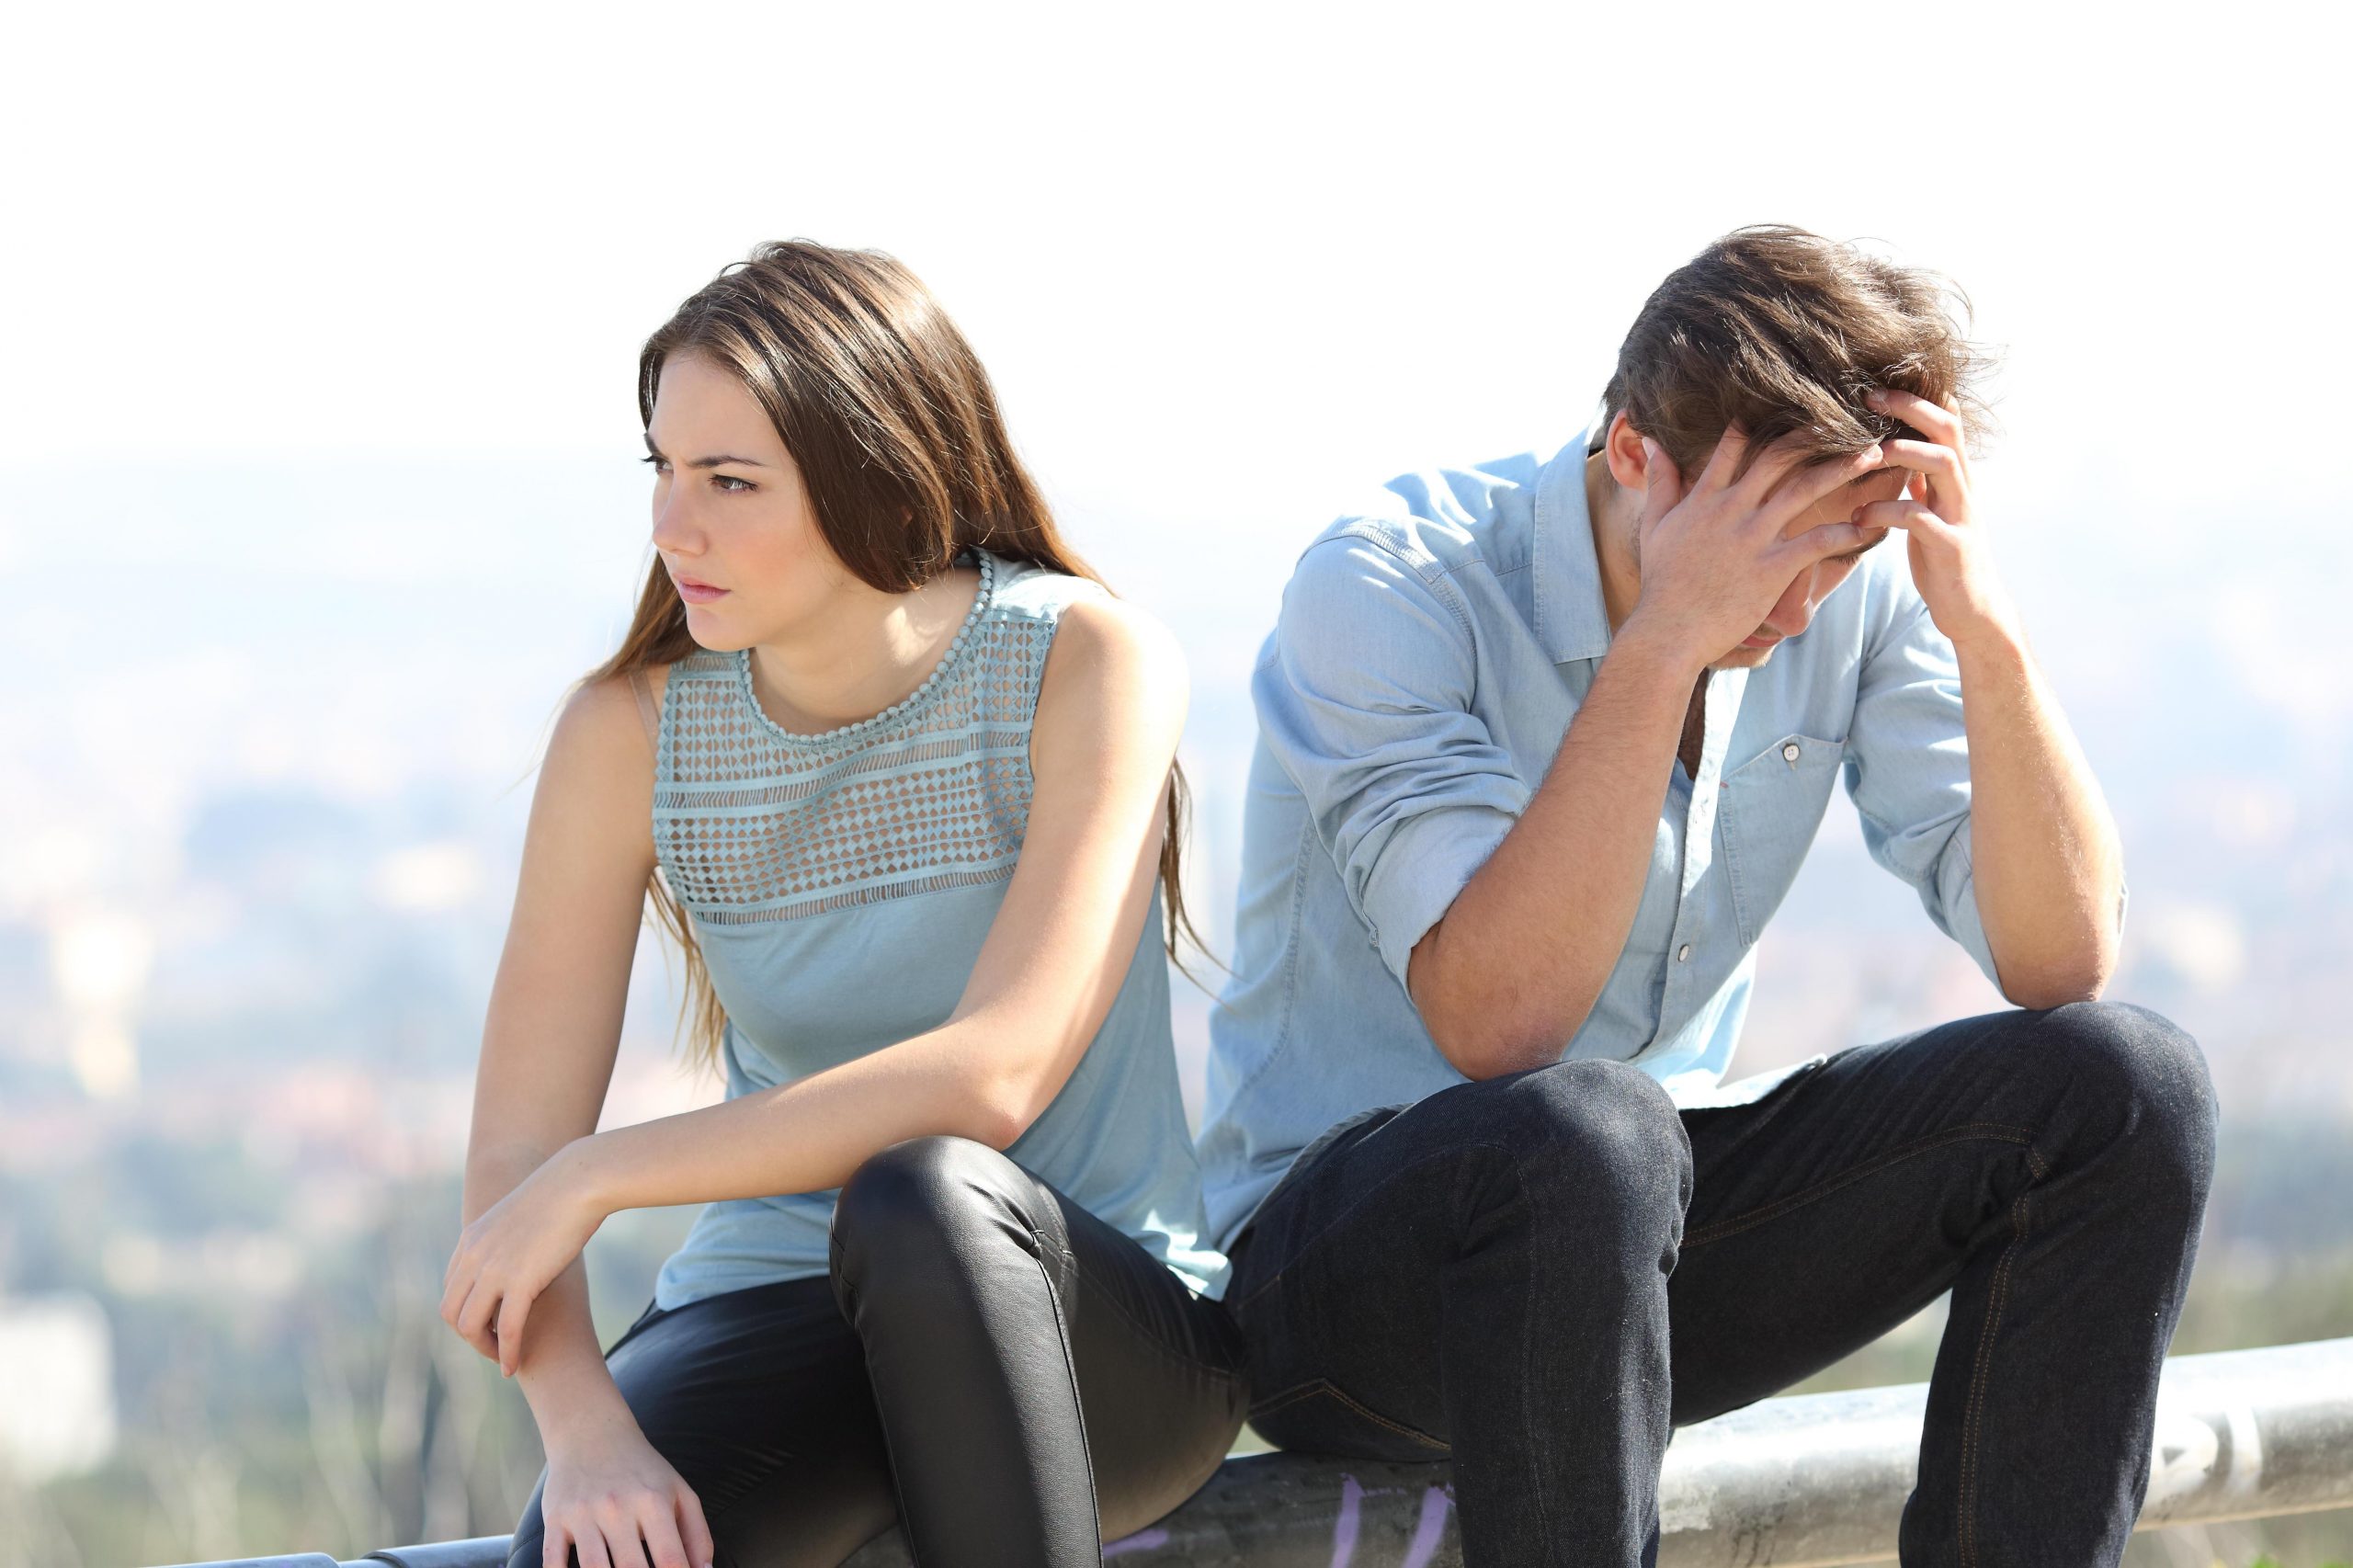 6 Things A Woman Should Never Negotiate In A Relationship